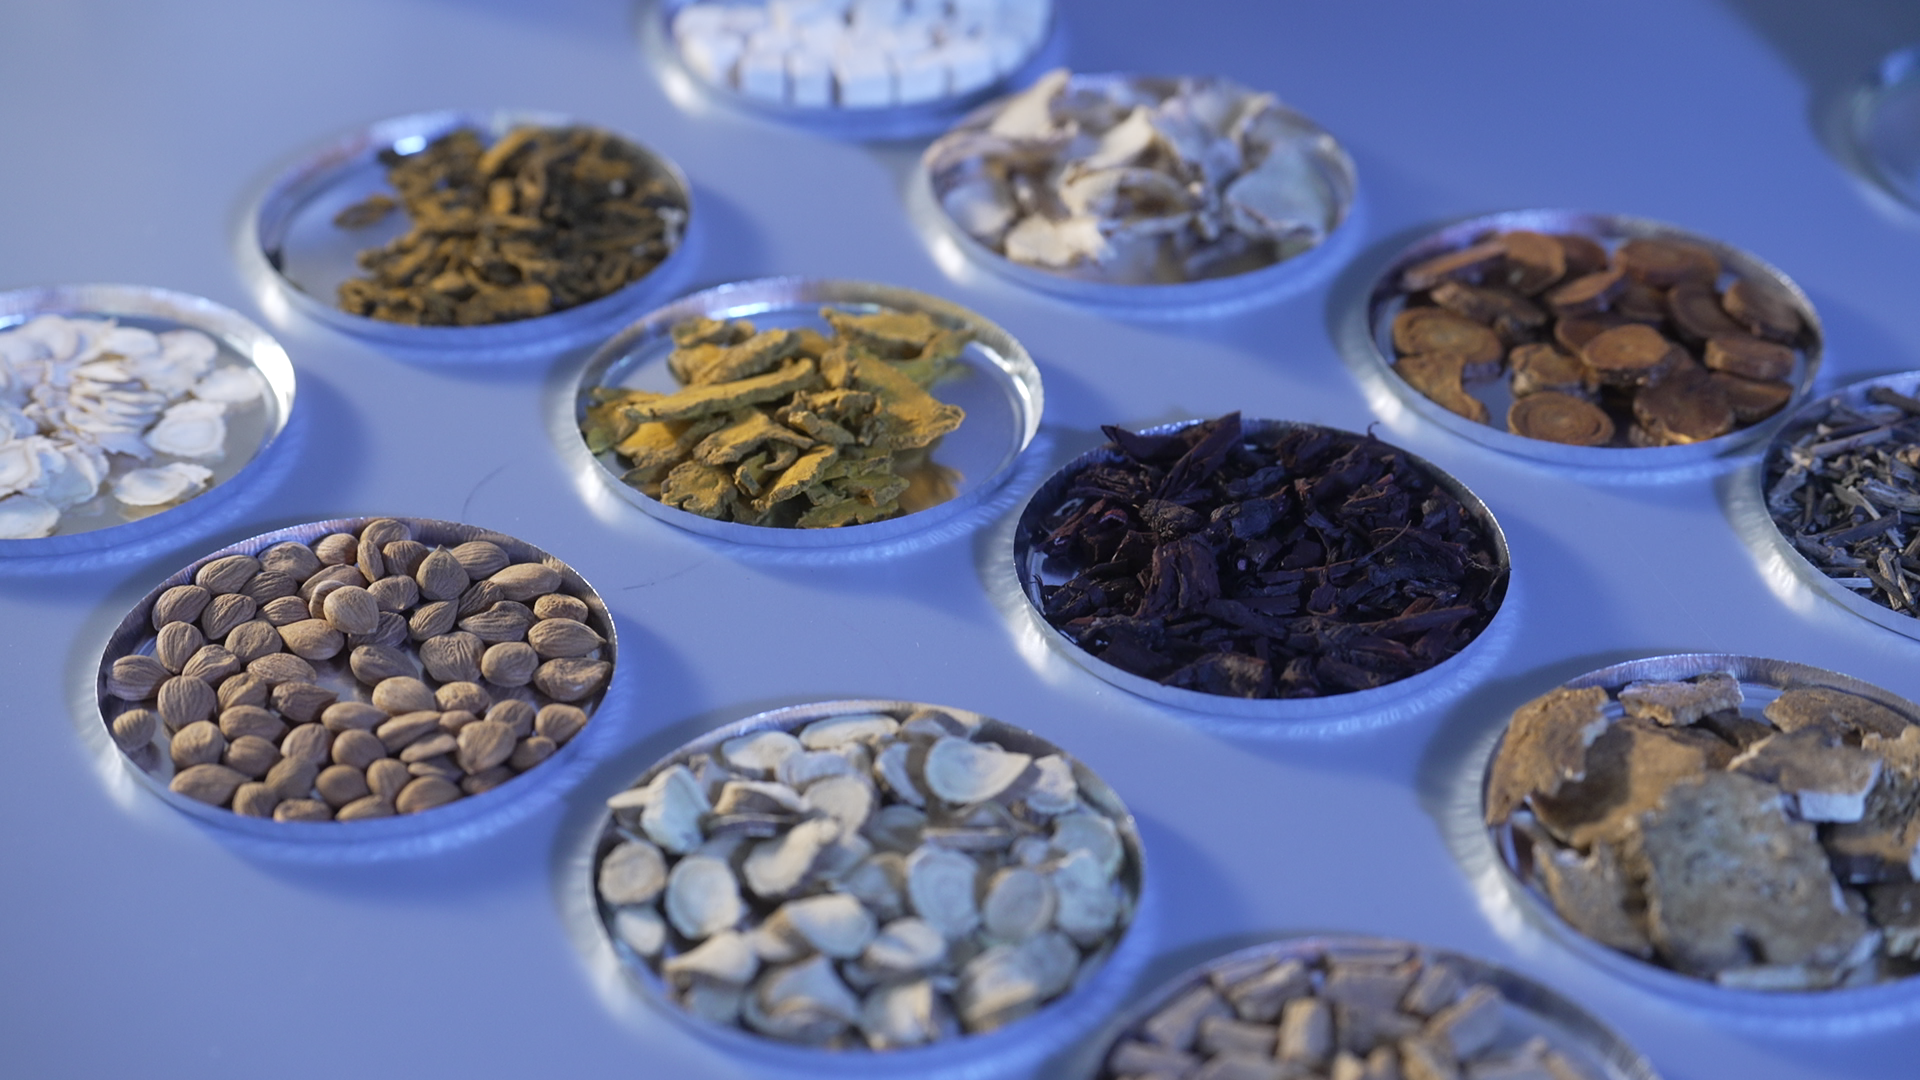 CDD-2103: Chinese Herbal Medicine for maintaining Ulcerative Colitis remission